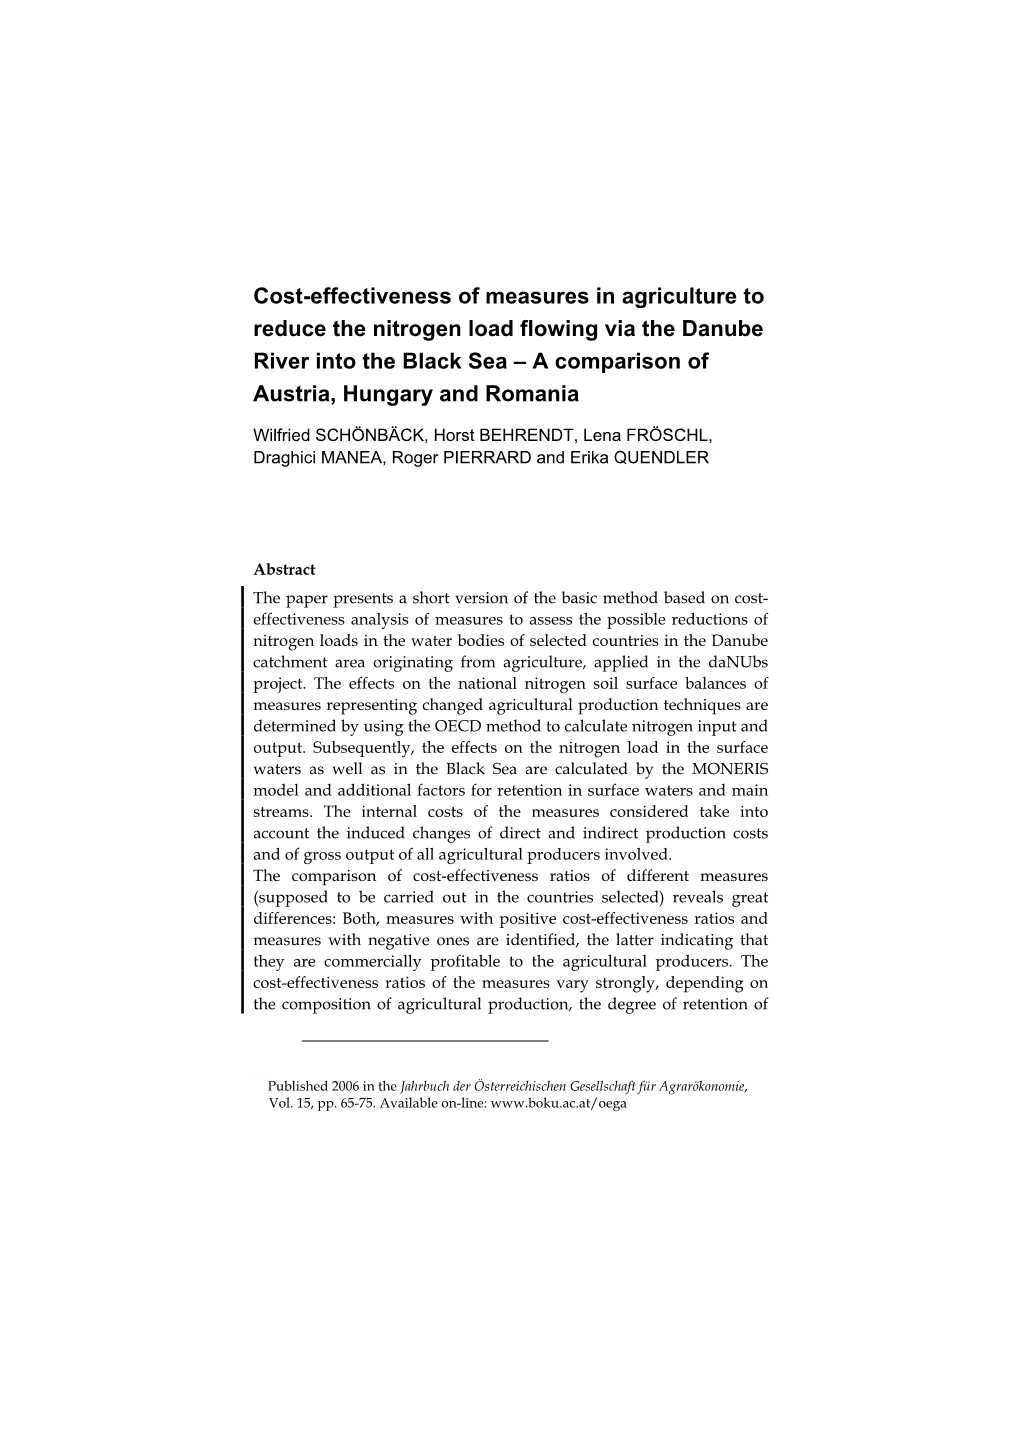 Cost-Effectiveness of Measures in Agriculture to Reduce the Nitrogen